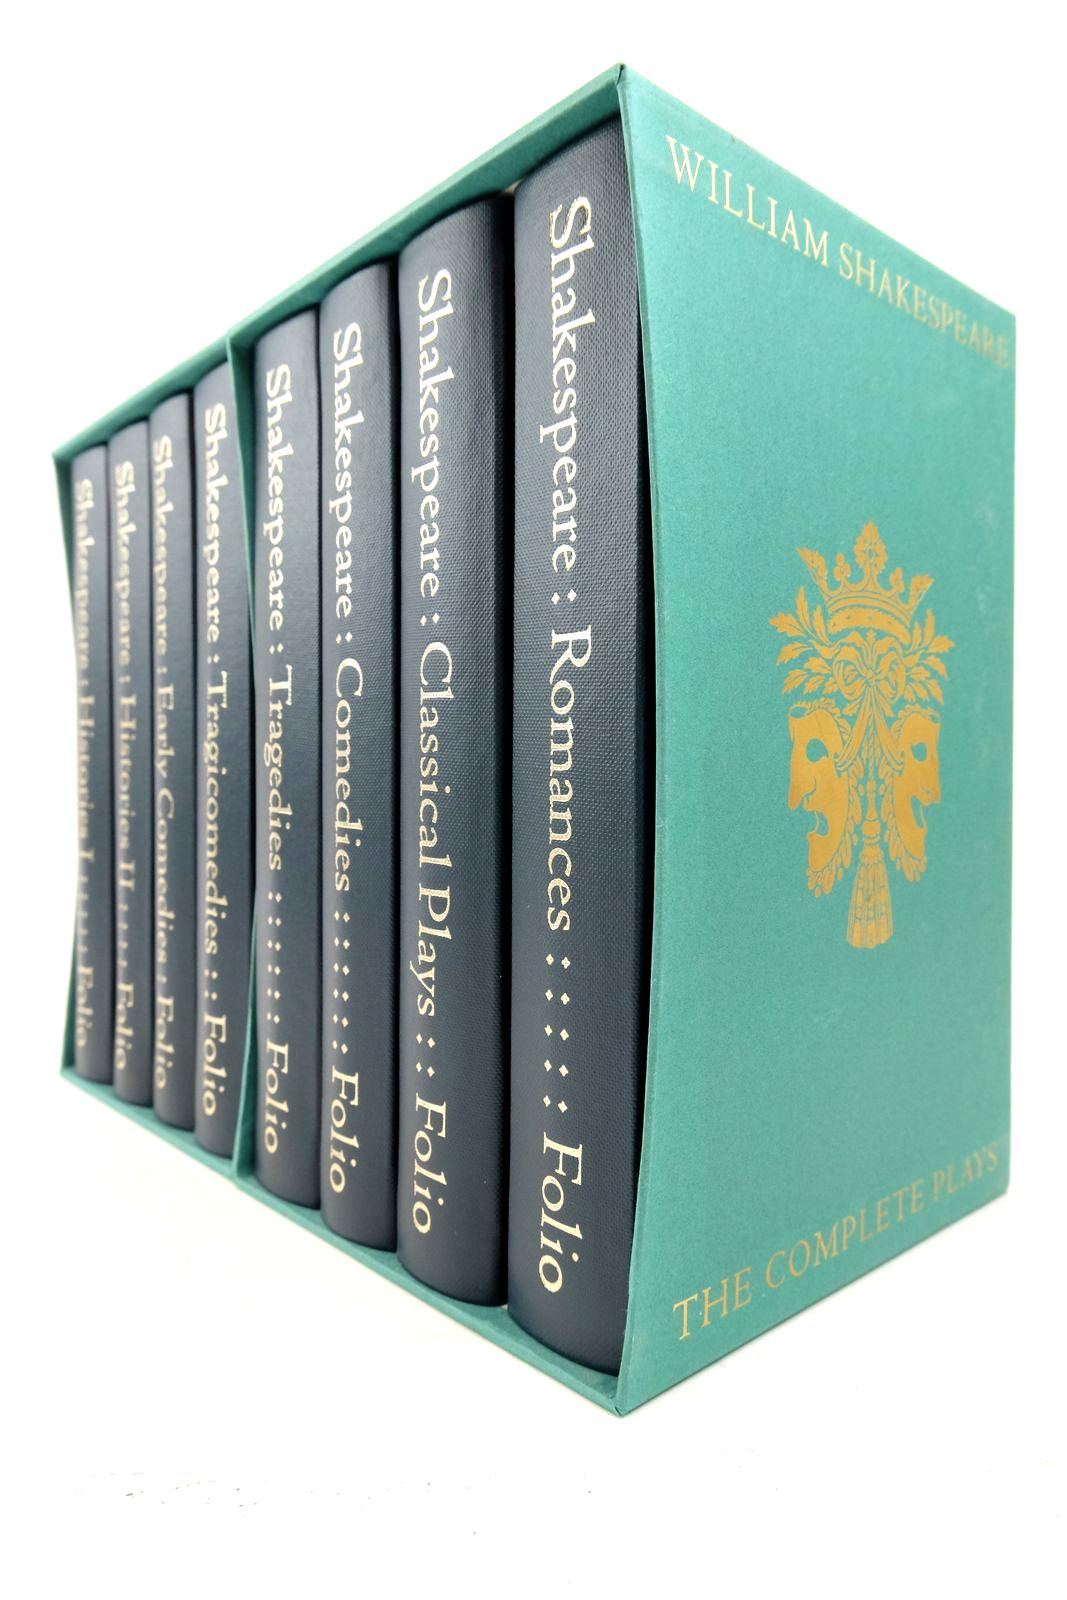 Photo of THE COMPLETE PLAYS (8 VOLUMES) written by Shakespeare, William published by Folio Society (STOCK CODE: 2140936)  for sale by Stella & Rose's Books